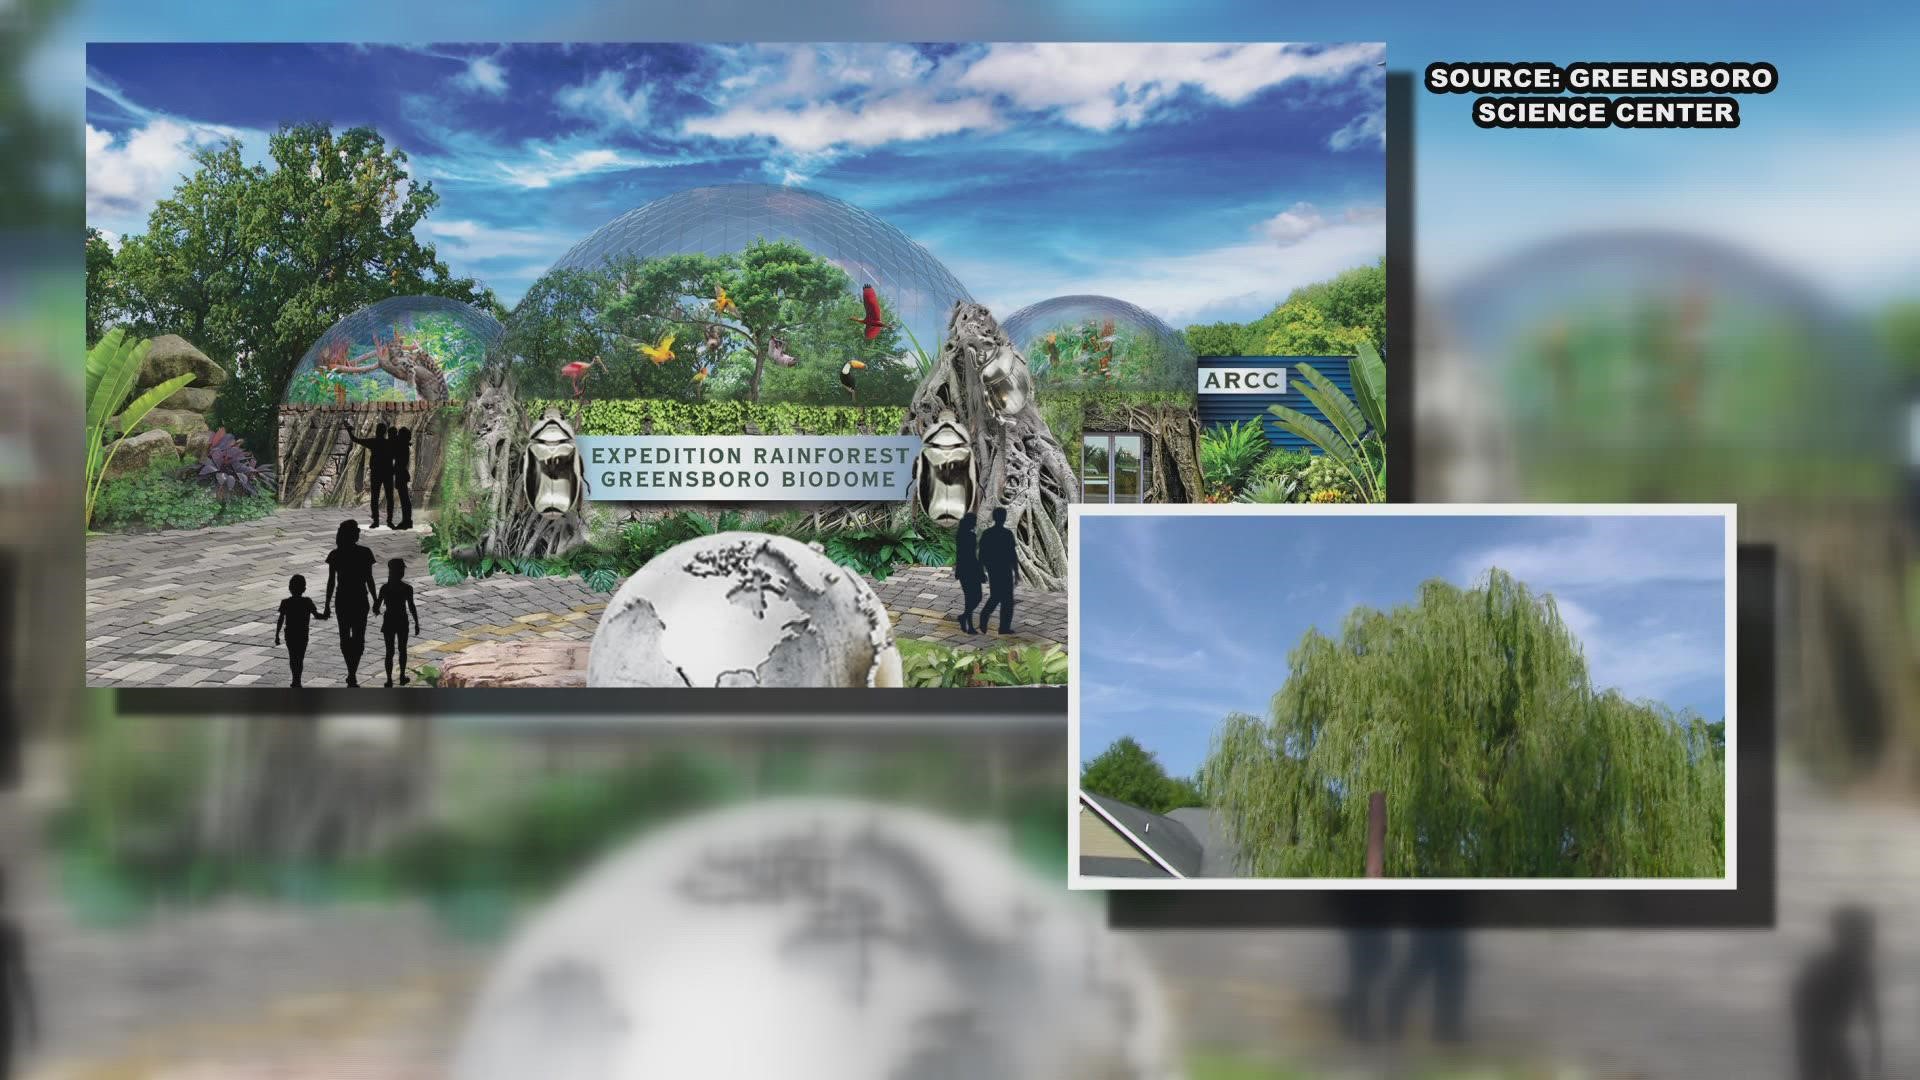 The science center will break ground on a rainforest biodome and an aquatic rehabilitation and care complex in 2024.